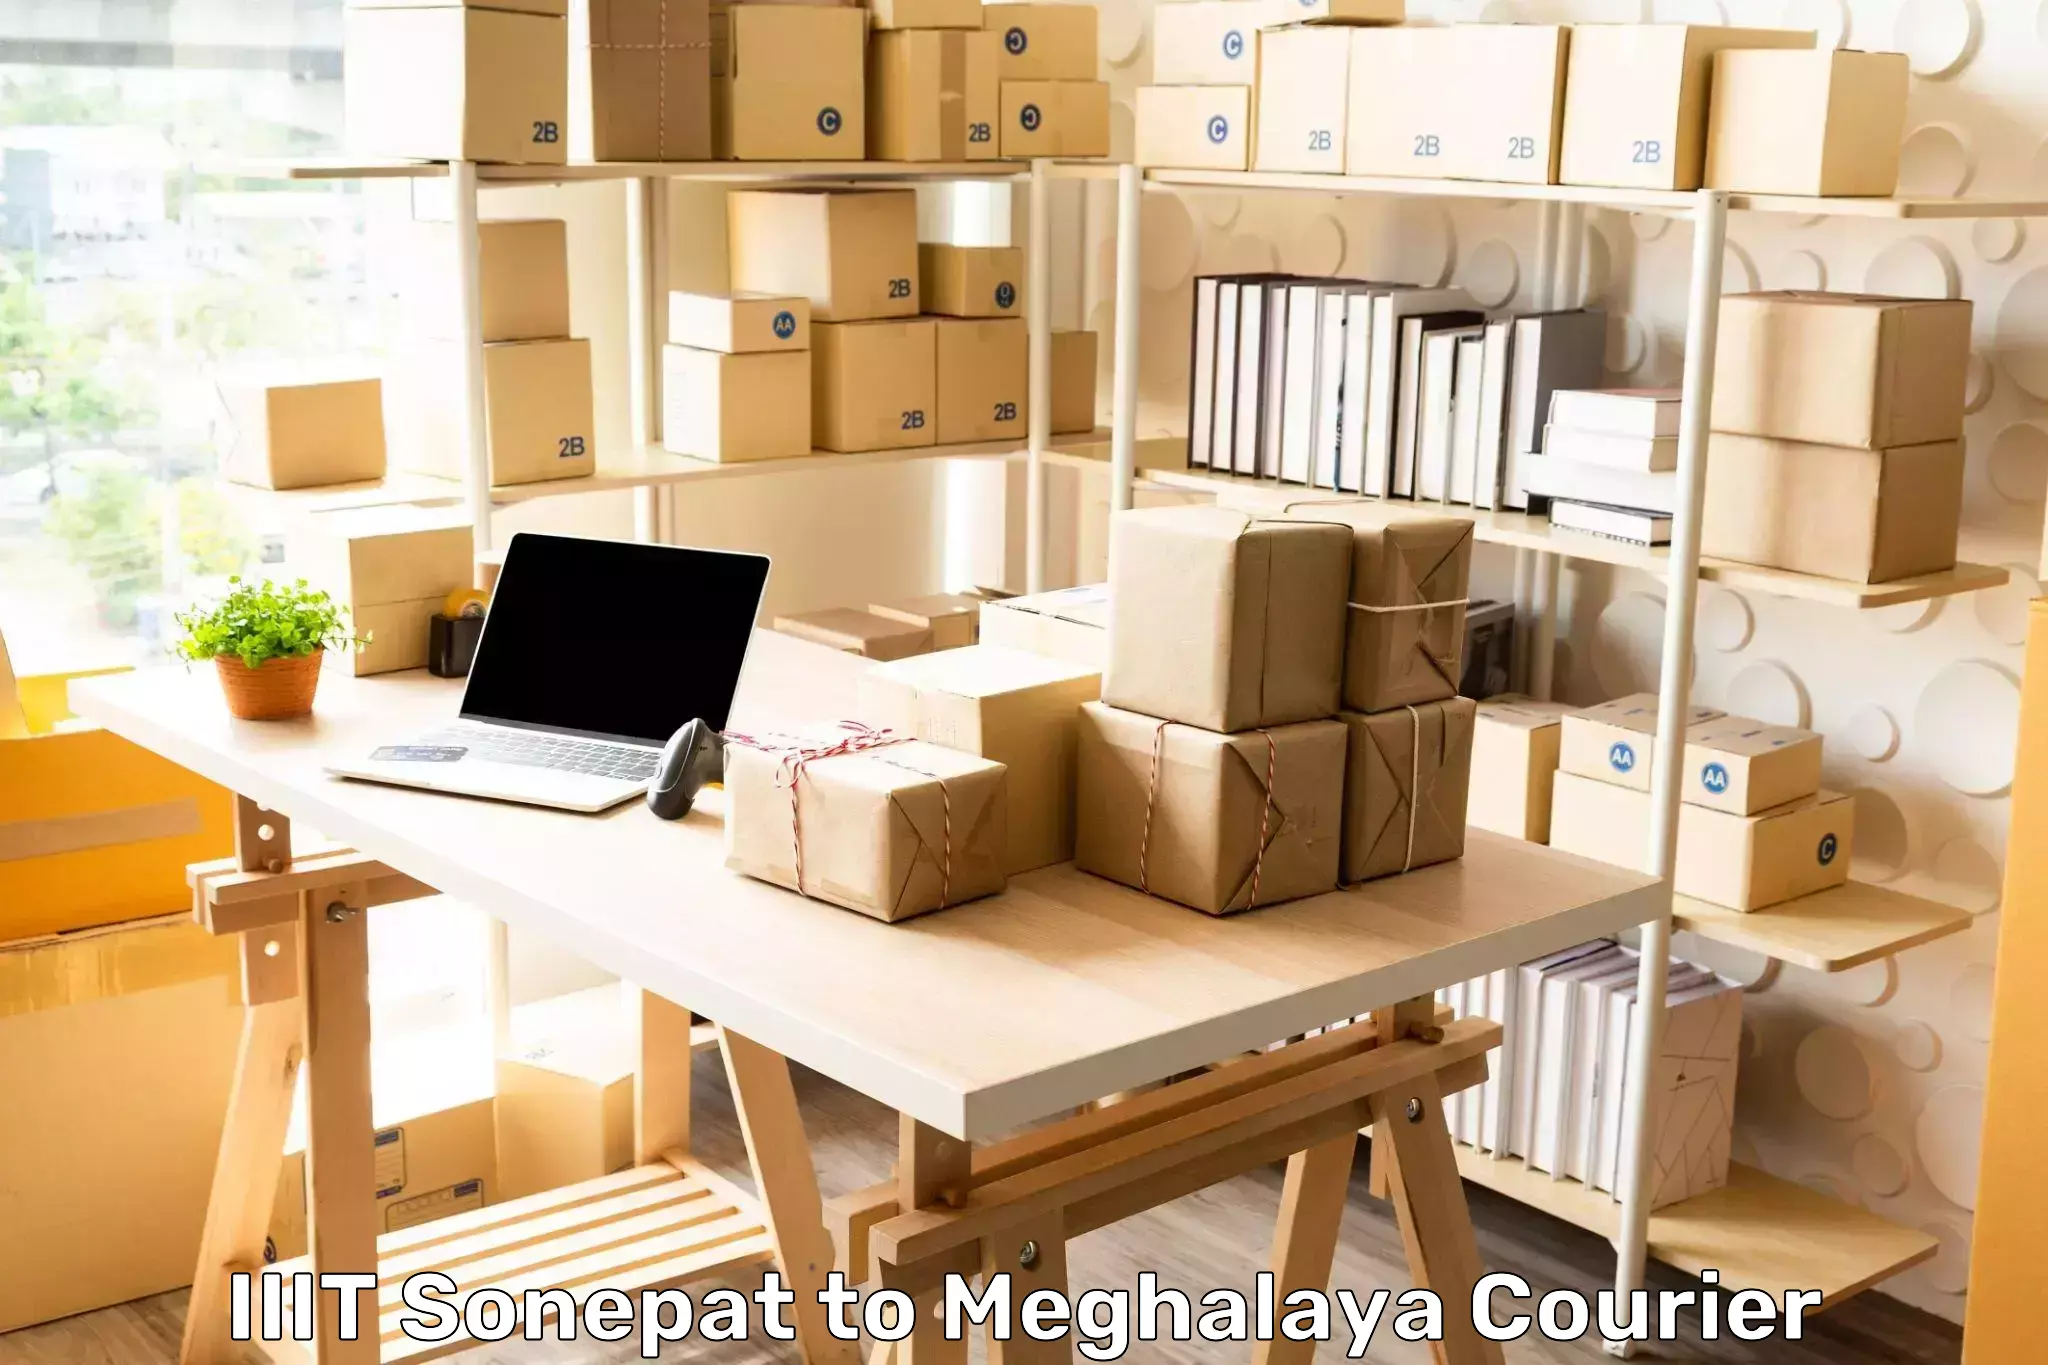 Medical delivery services in IIIT Sonepat to Meghalaya